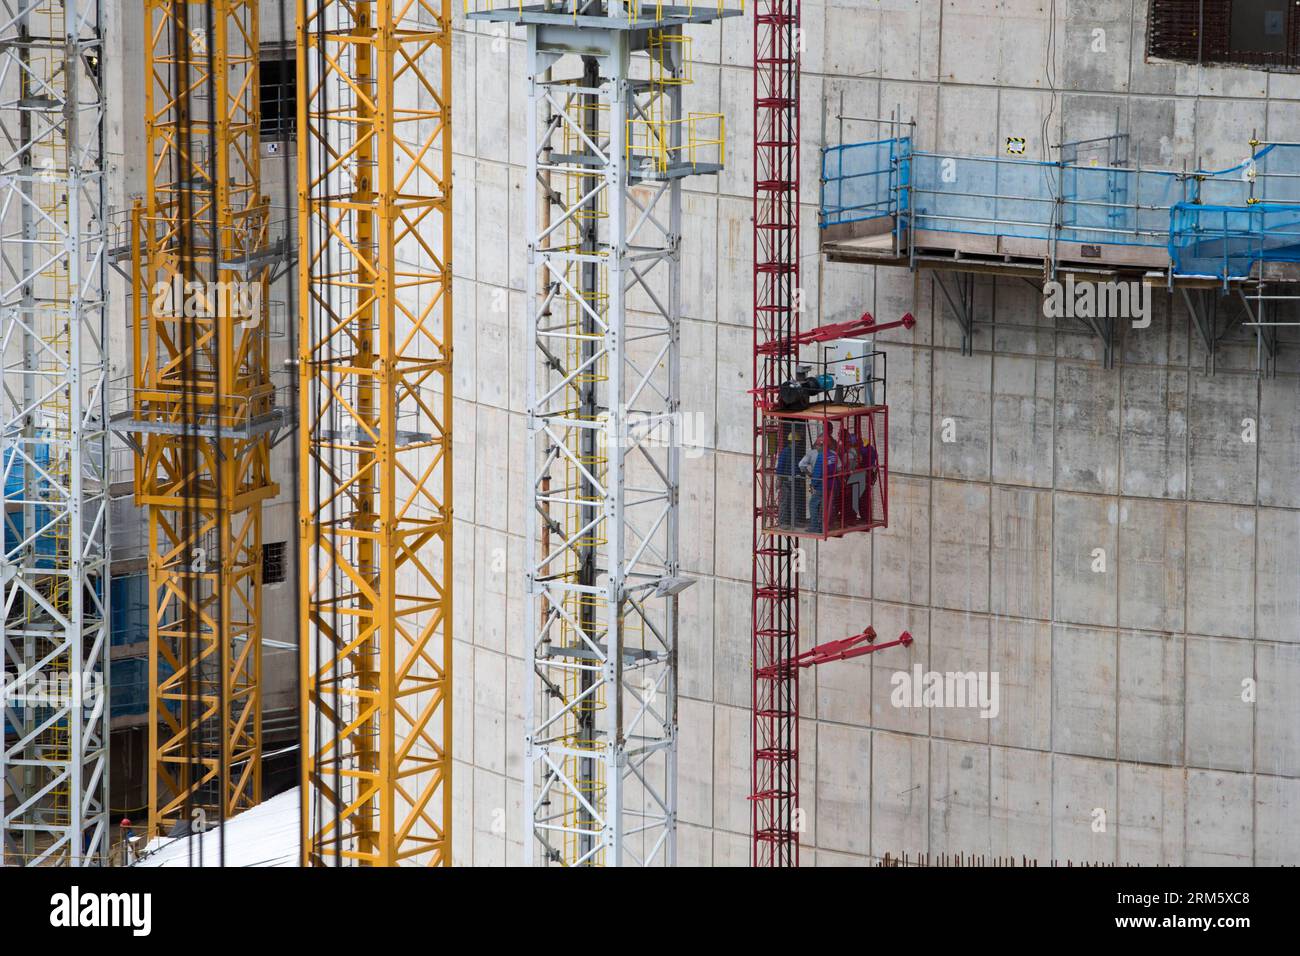 Bildnummer: 60731060  Datum: 18.11.2013  Copyright: imago/Xinhua Construction workers take an elevator to the top of the containment envelope of the Angra III nuclear reactor in the city of Angra dos Reis, Rio de Janeiro, Nov. 18, 2013. Angra Nuclear Power Plant is the only nuclear power plant in Brazil. It locates on the Itaorna Beach in the city of Angra dos Reis of Rio de Janeiro. Currently it has two pressurized water reactor, Angra I, with a gross output of 640 Mega Watts of electricity and Angra II with a gross output of 1350 Mega Watts of electricity. The third reactor, Angra III, is un Stock Photo